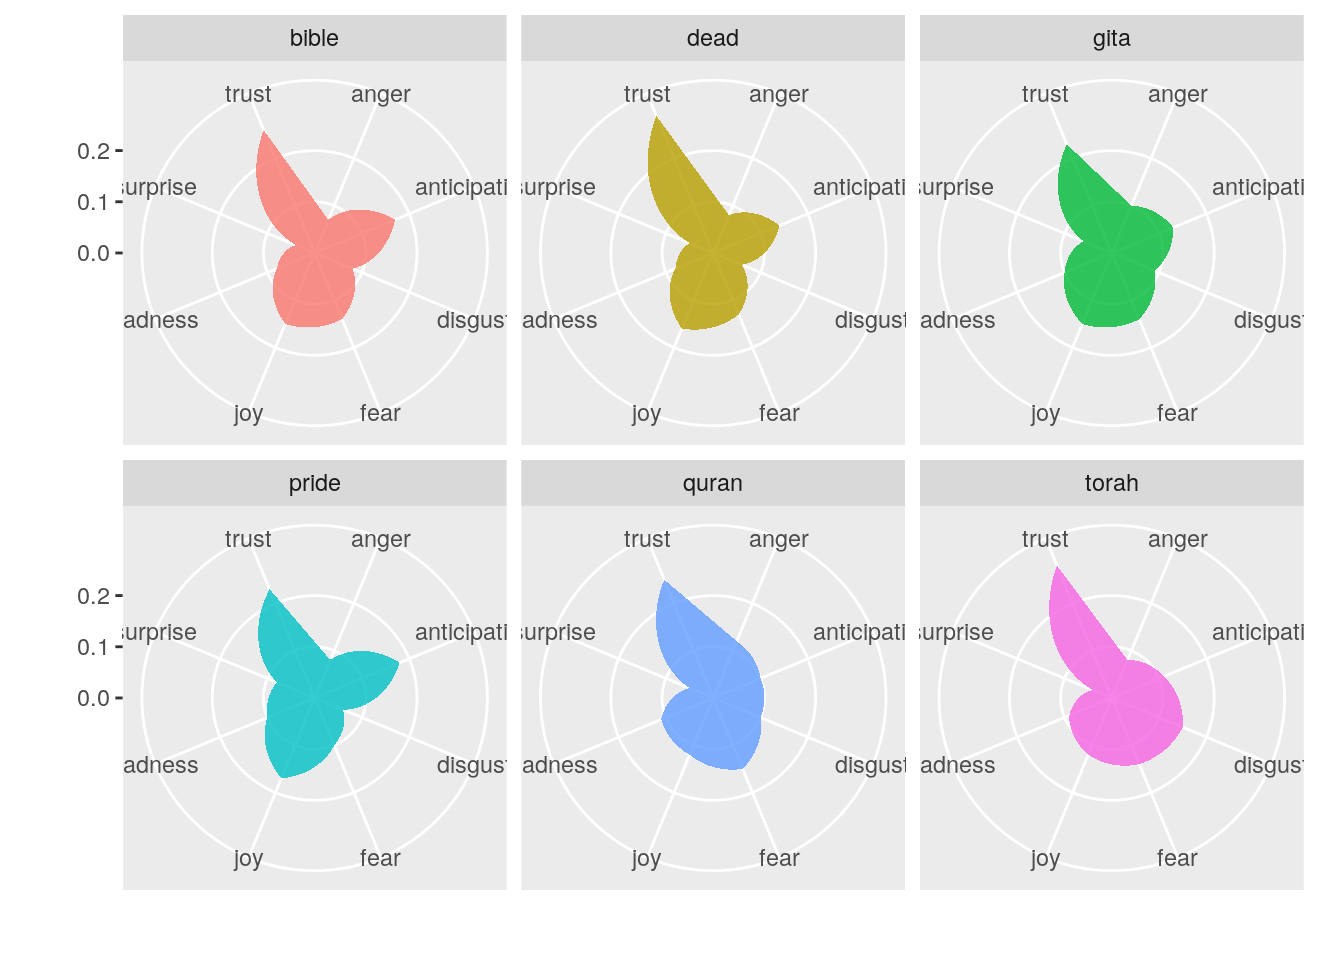 Frequency polygons of the proportion of emotions for each text shown in facets.